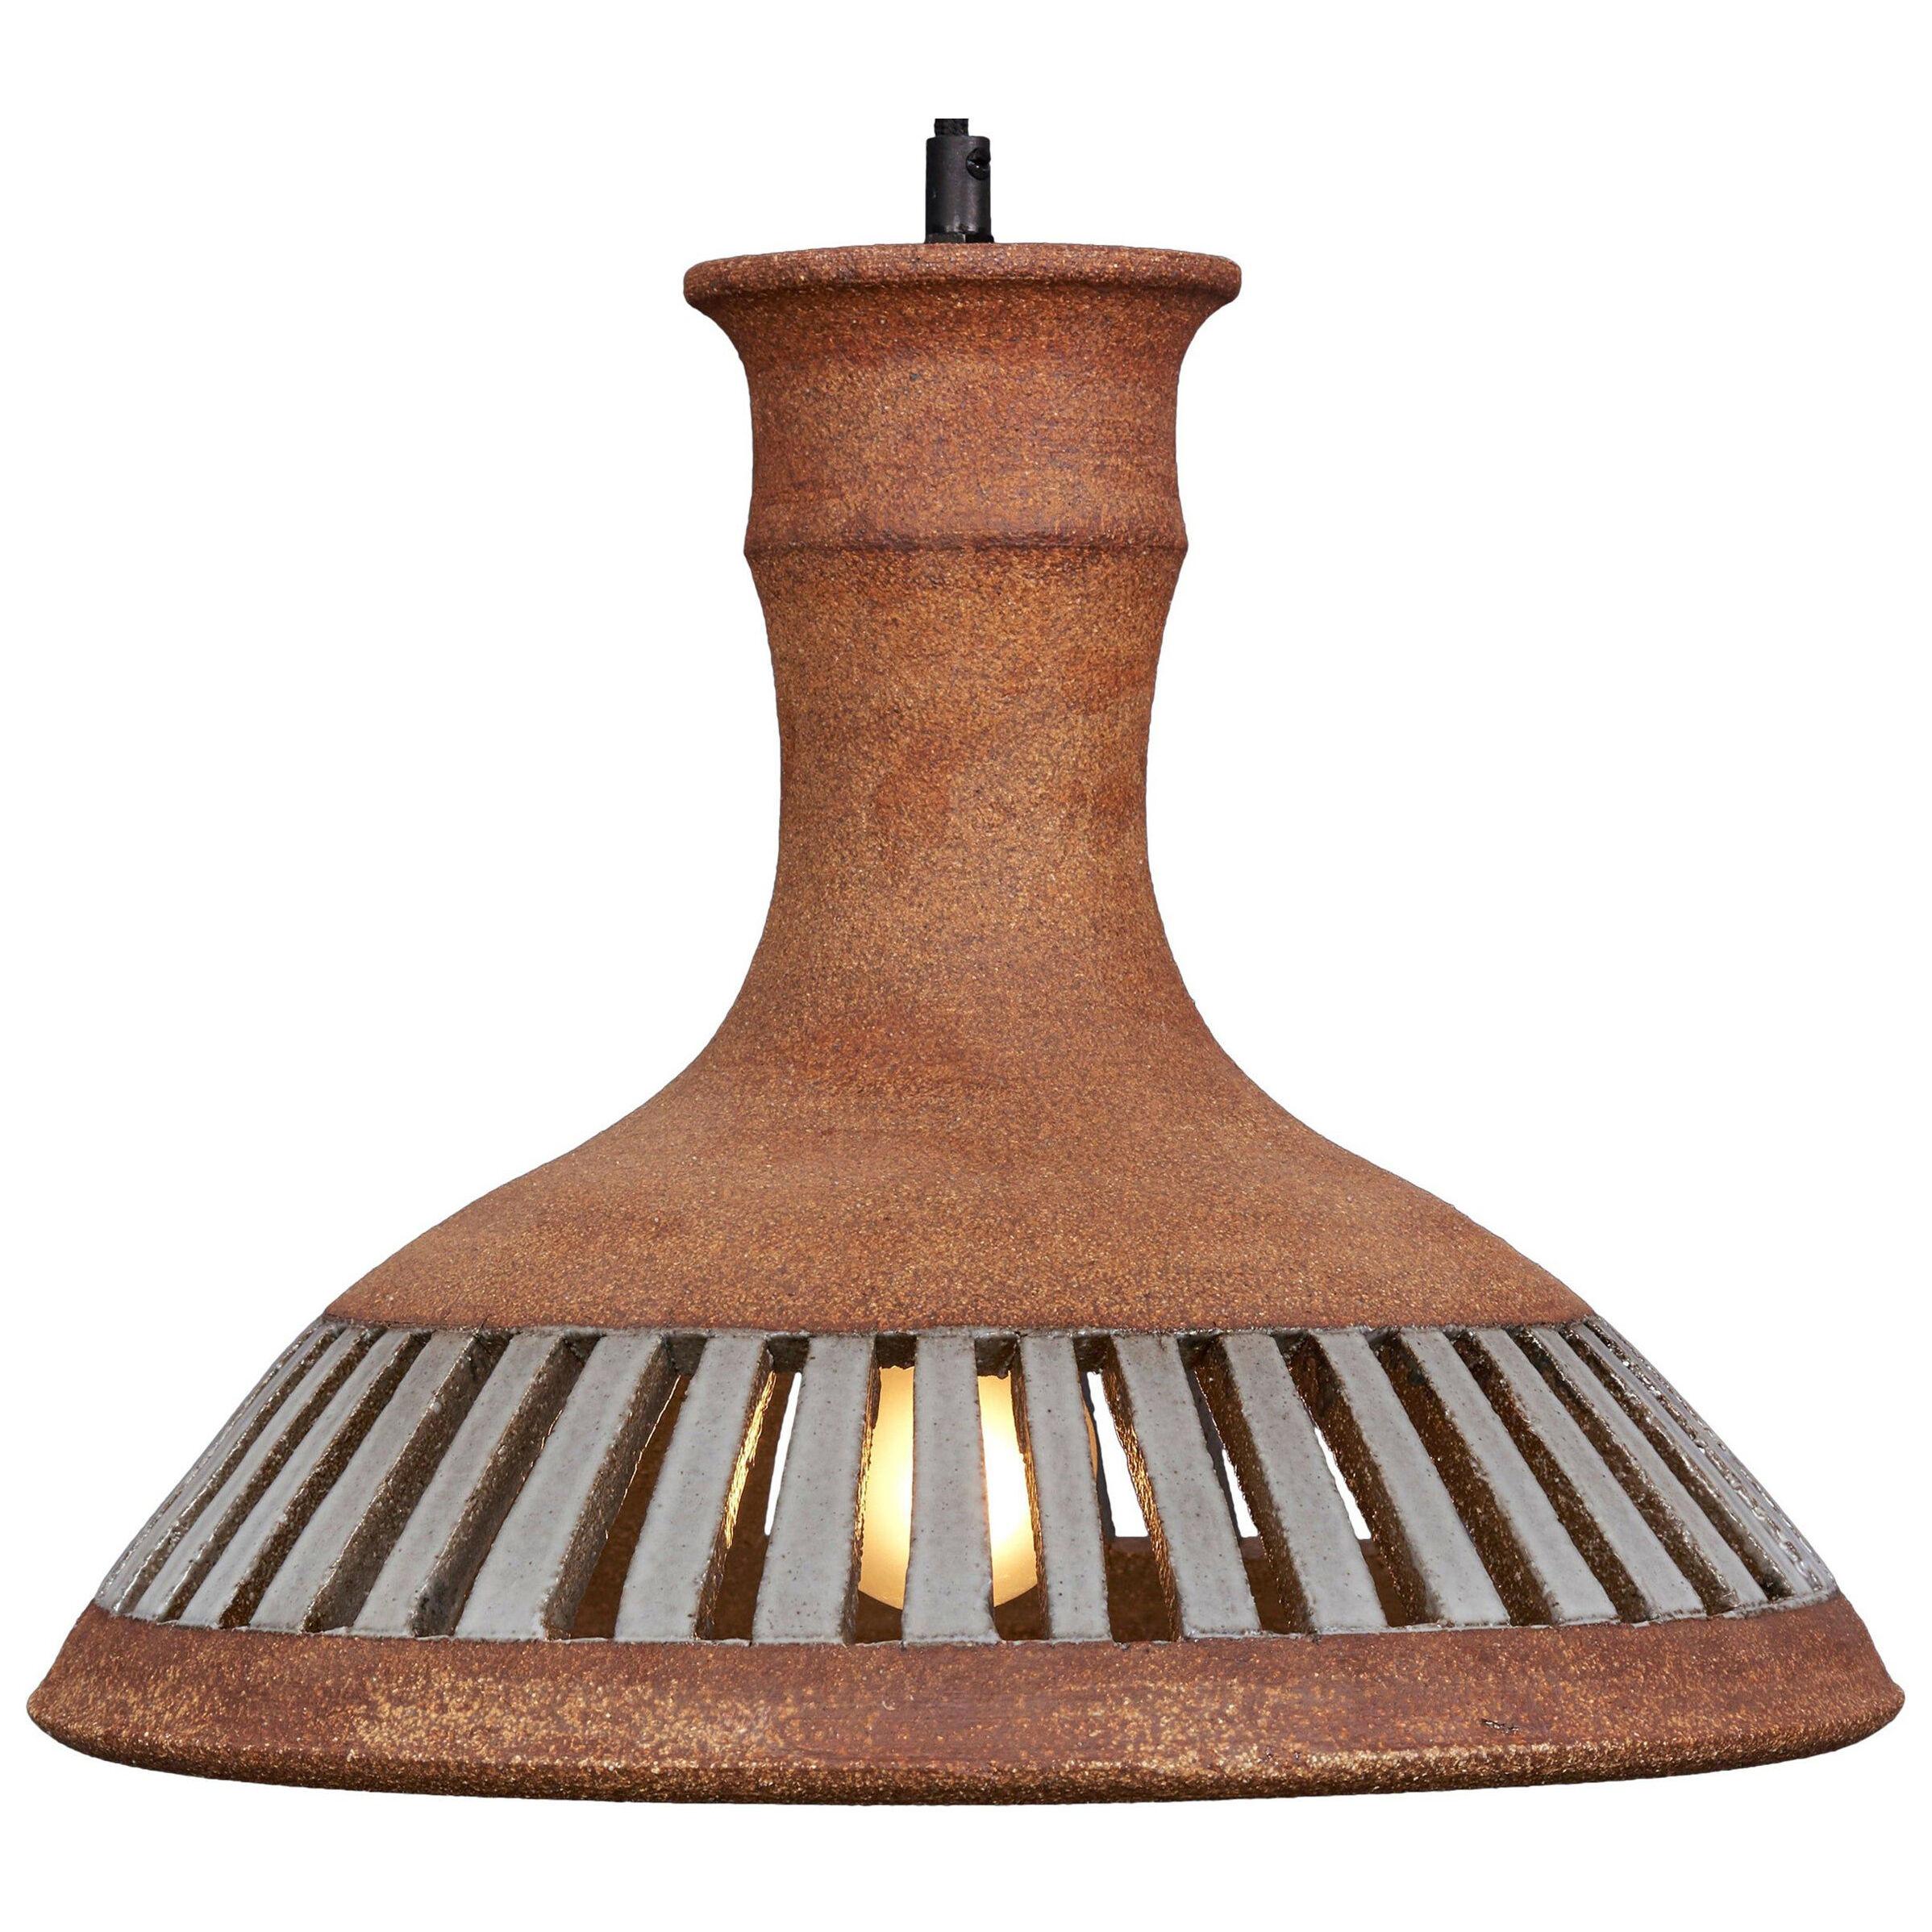 Clay Outdoor Hanging Light HL 10 by Brent J. Bennett, US, 2019